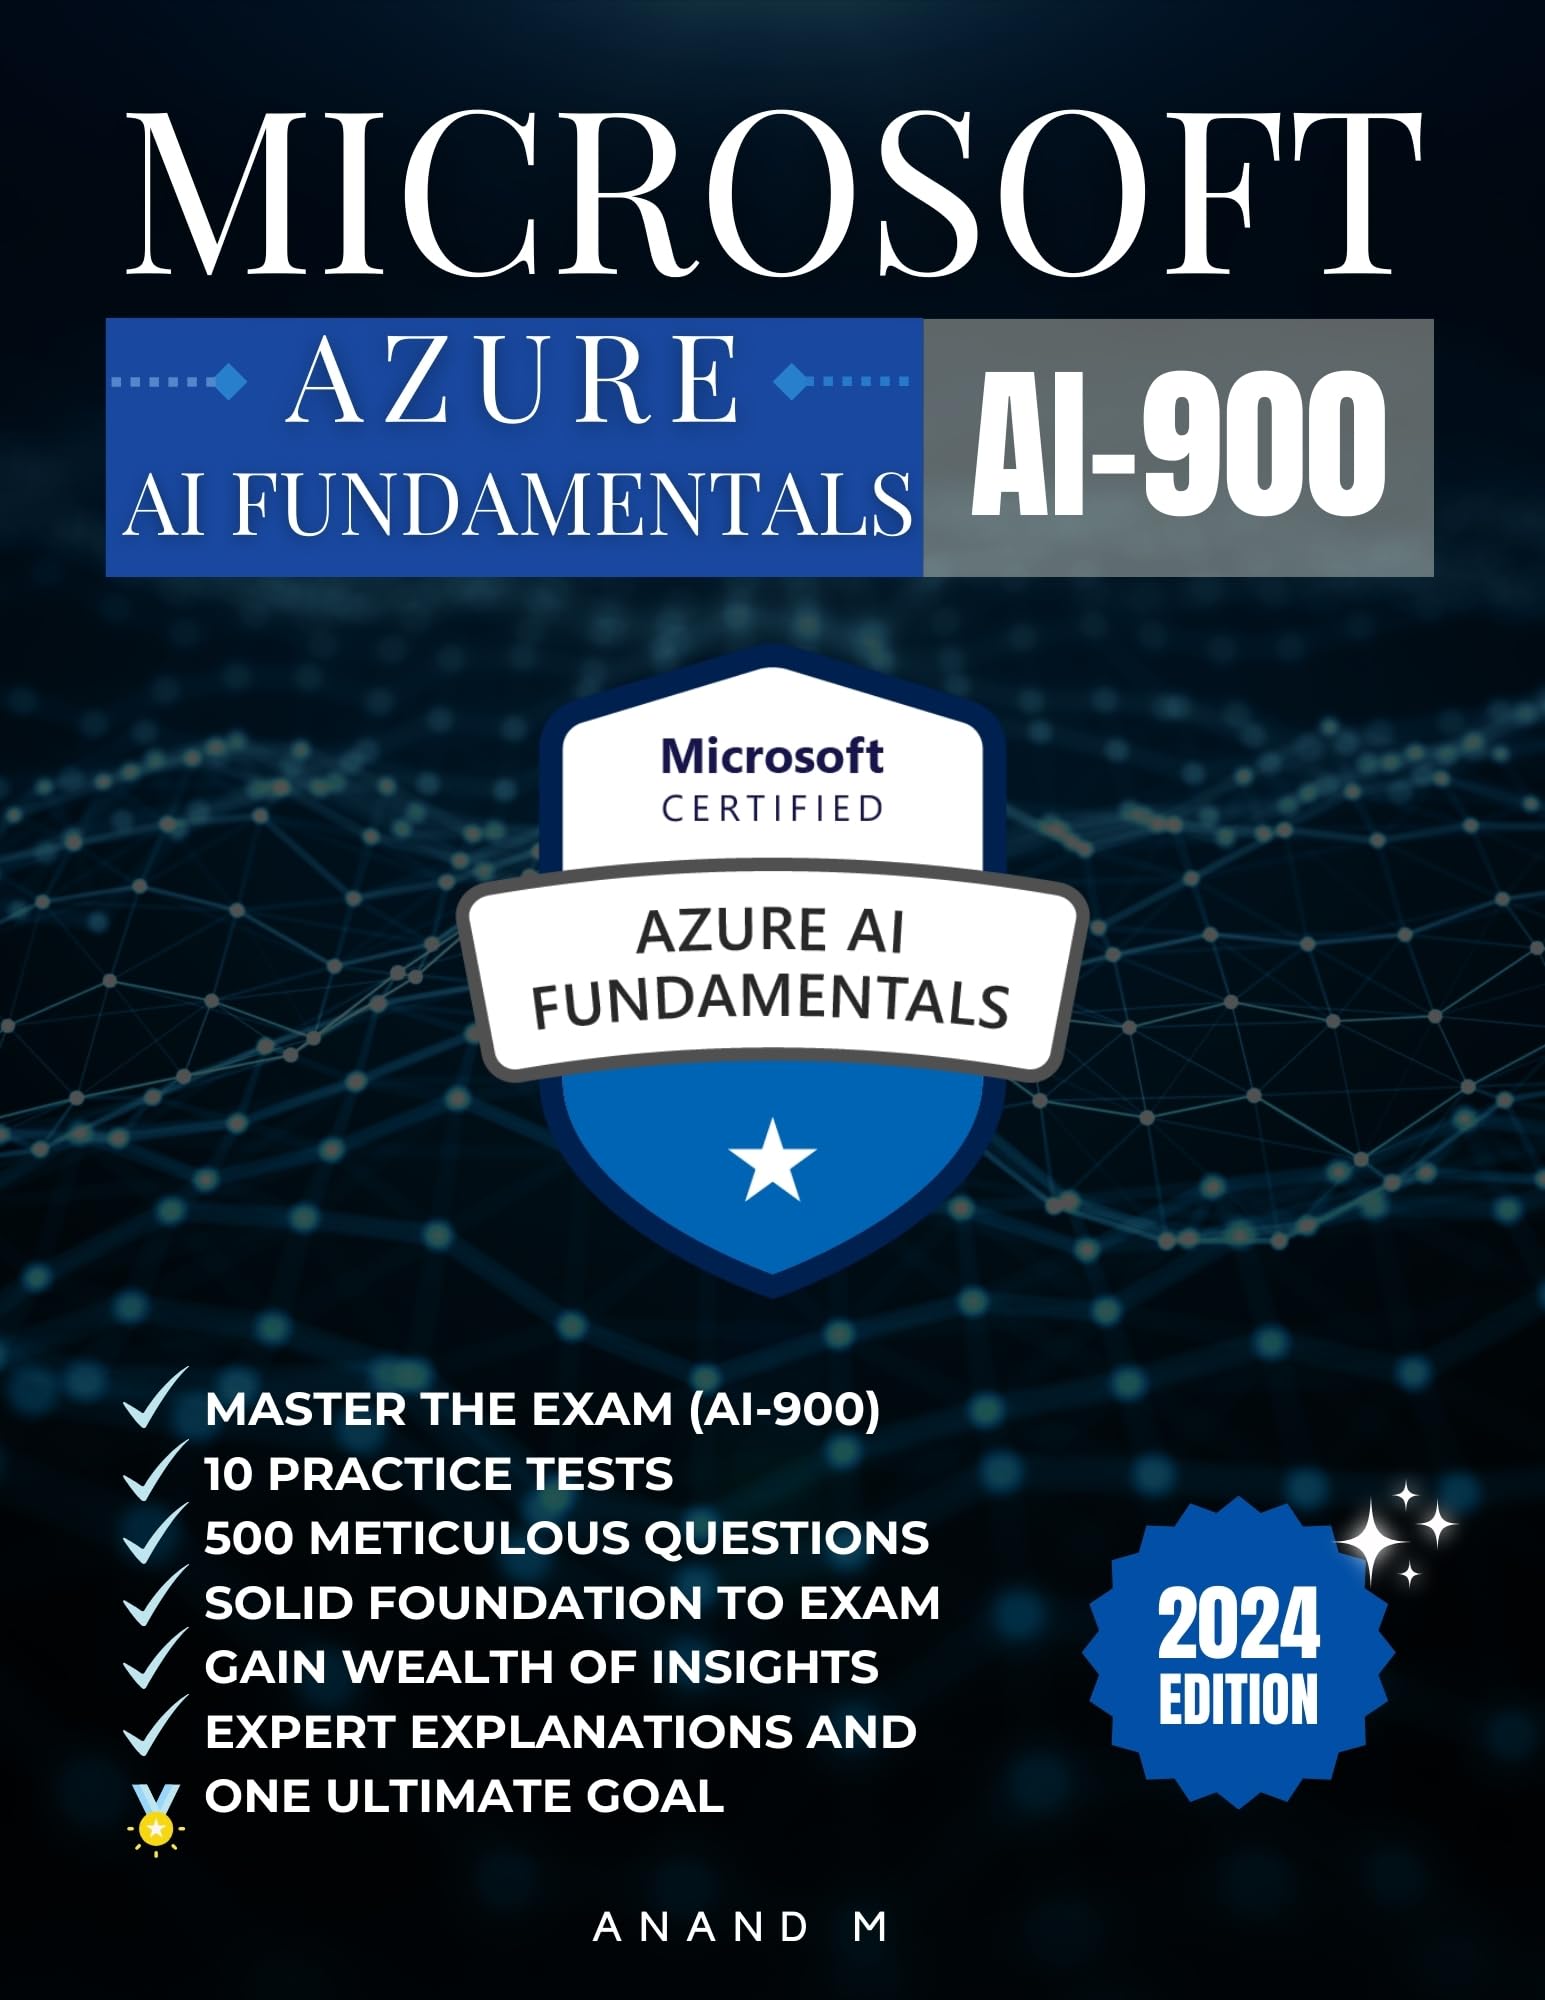 MICROSOFT AZURE AI FUNDAMENTALS | MASTER THE EXAM (AI-900): 10 PRACTICE TESTS, 500 RIGOROUS QUESTIONS, GAIN WEALTH OF INSIGHTS, EXPERT EXPLANATIONS AND ONE ULTIMATE GOAL